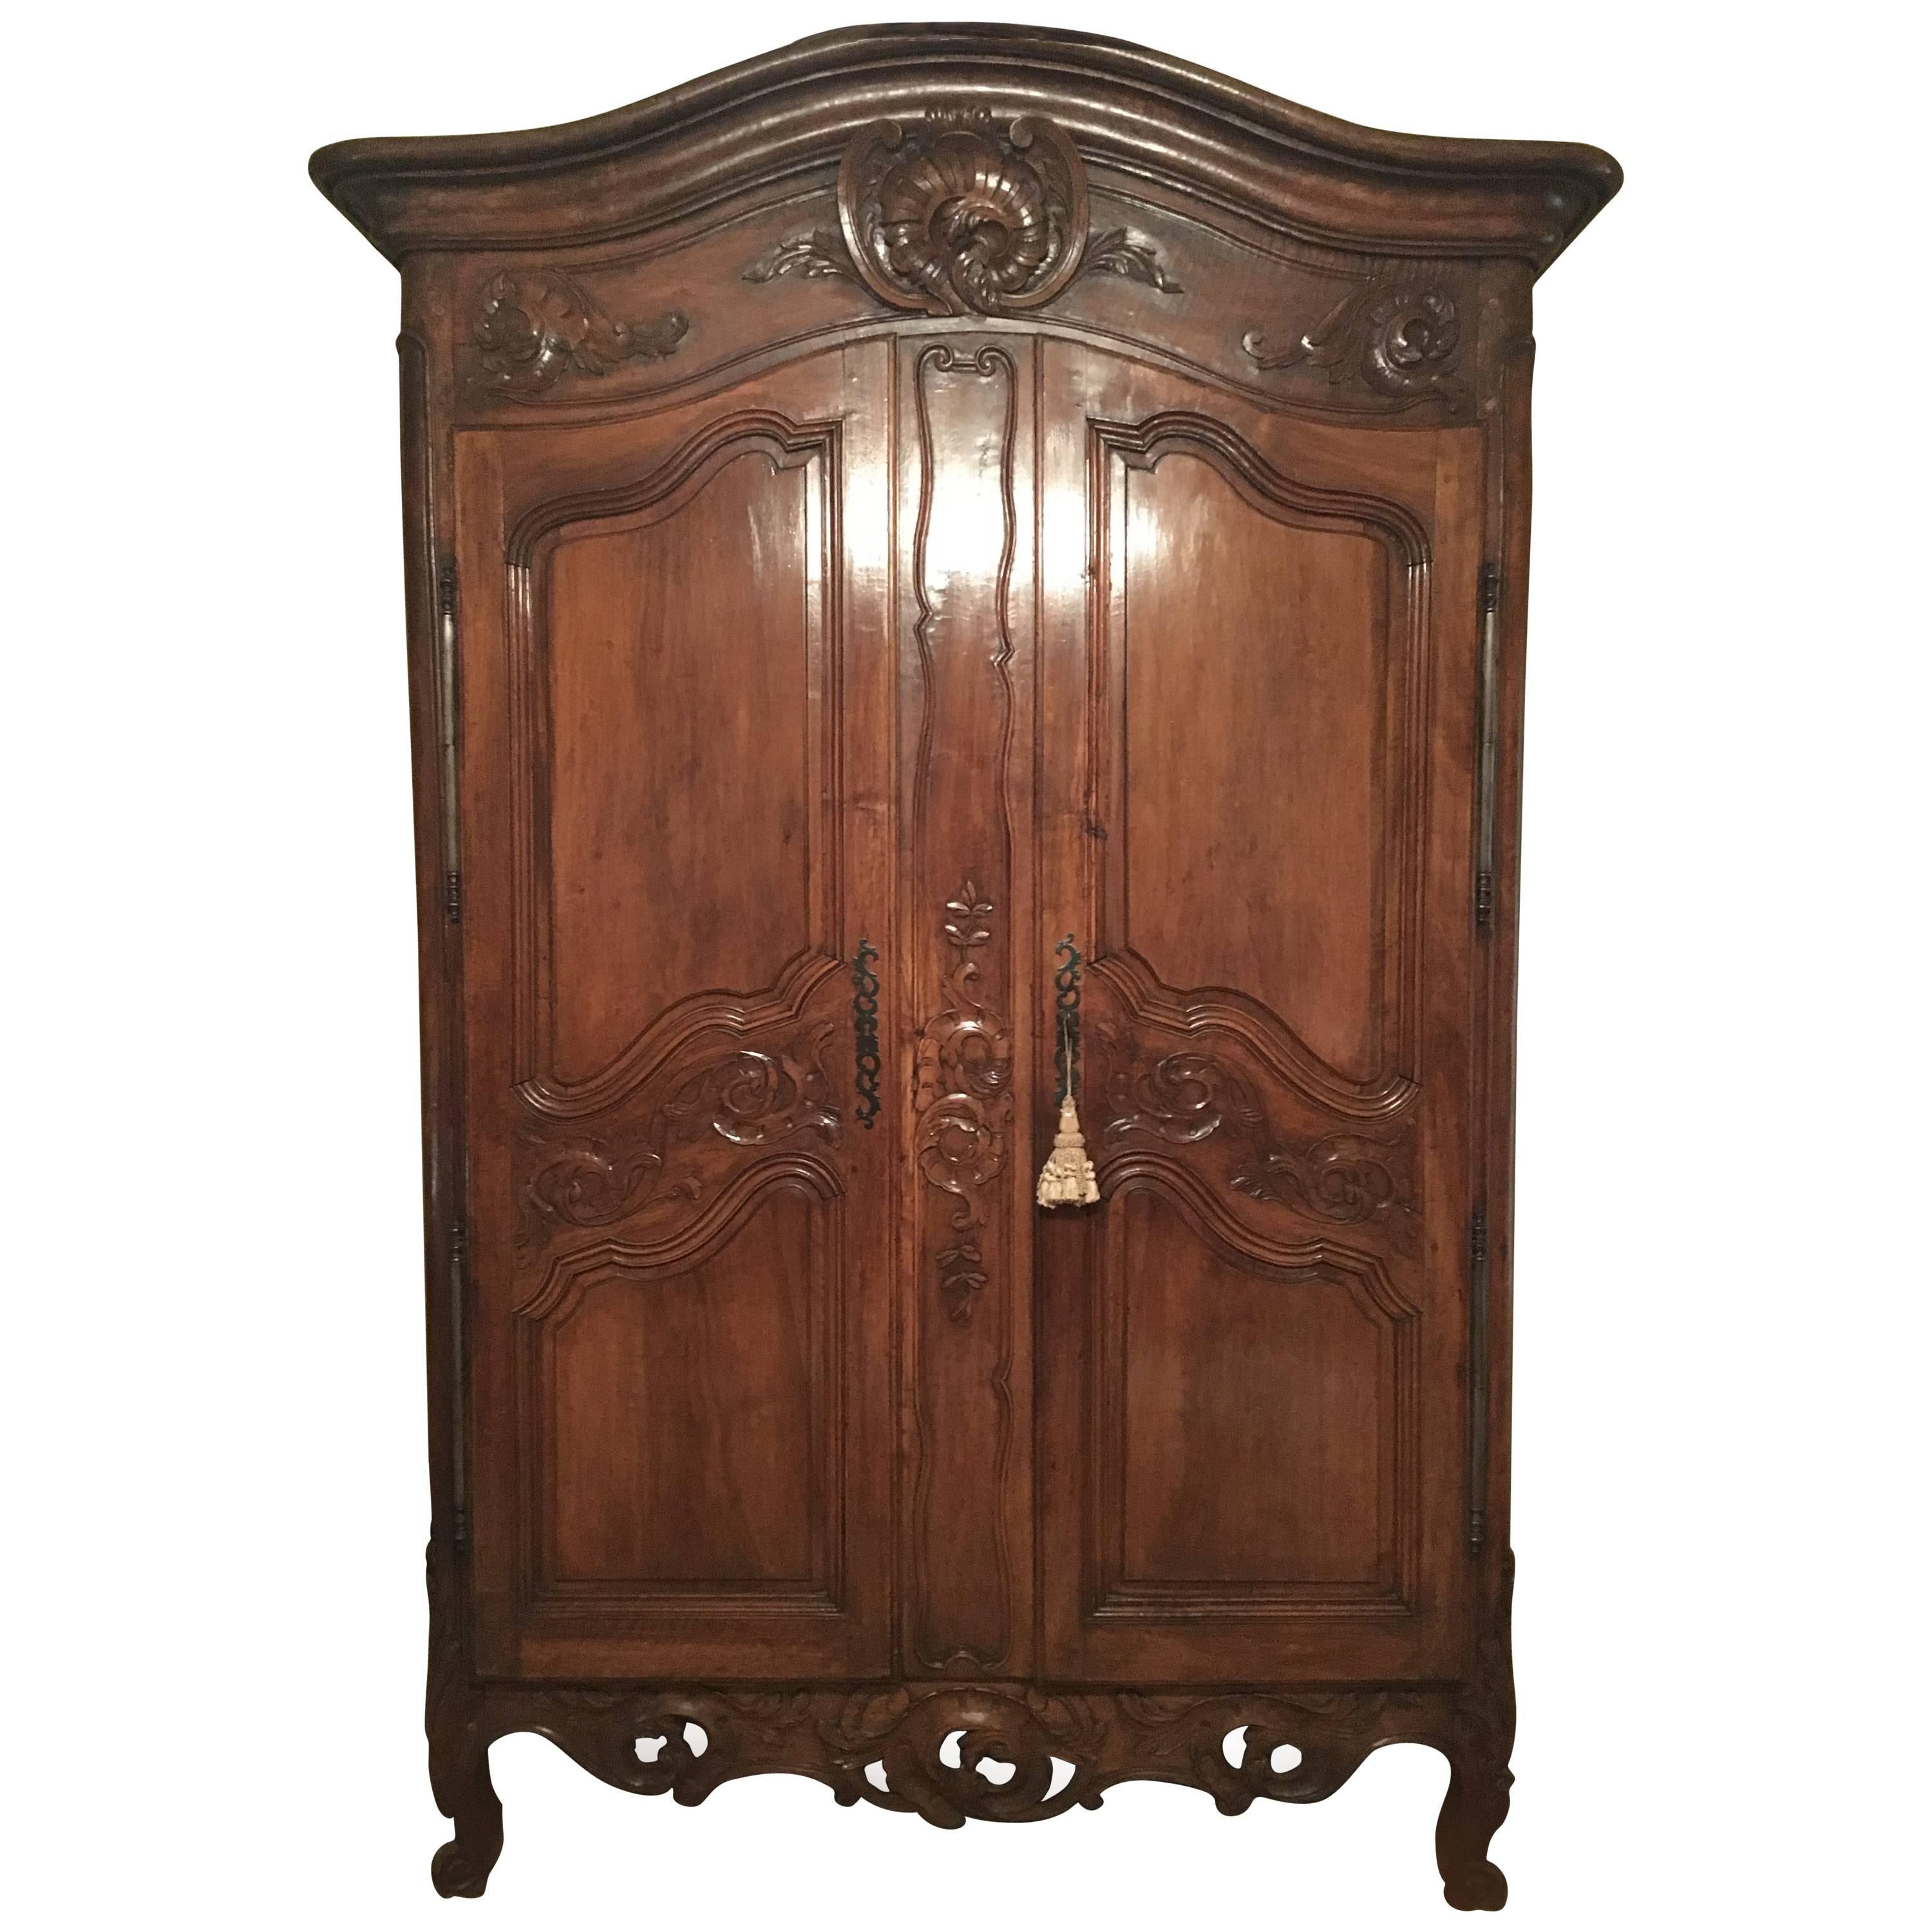 French Period Louis XV Provençal Walnut Armoire from the Mid 18th Century